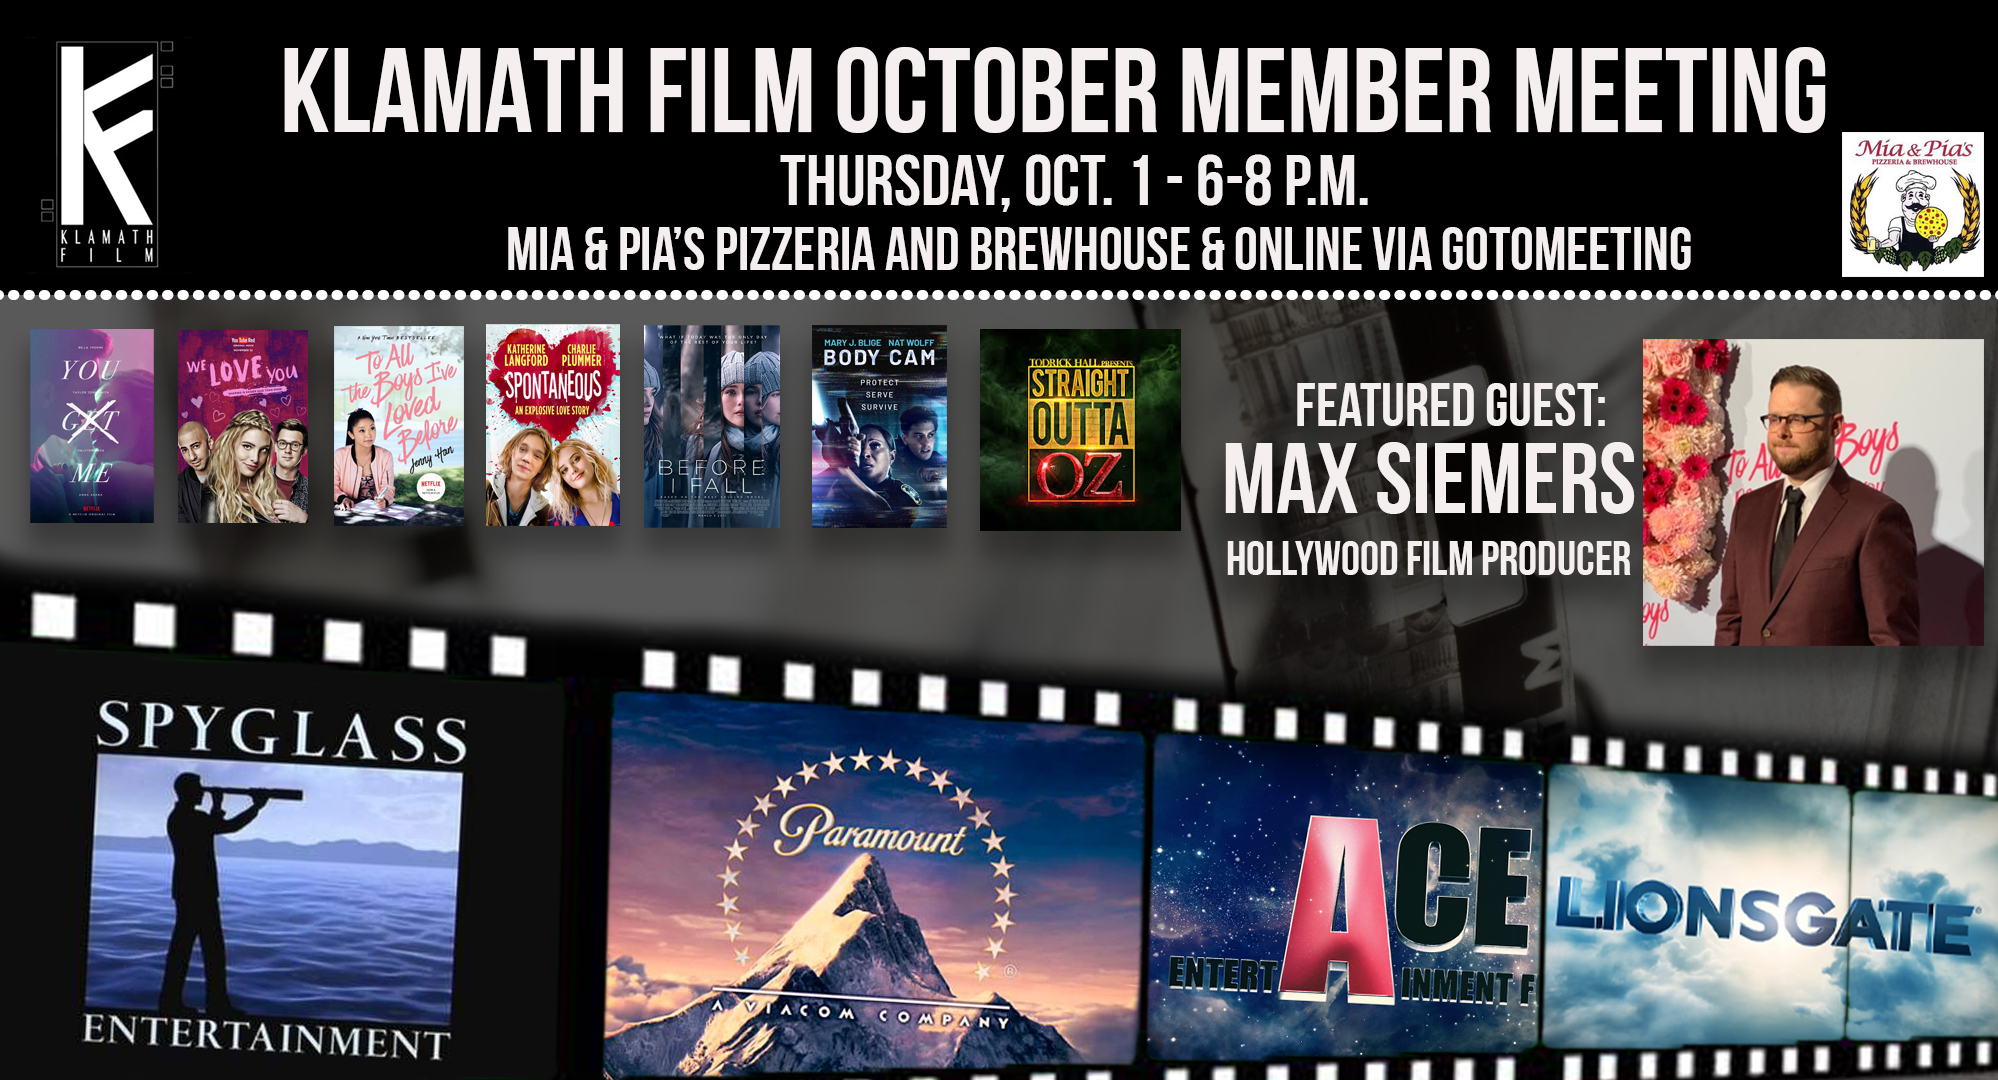 Hollywood film producer Max Siemers guest at October Klamath Film meeting